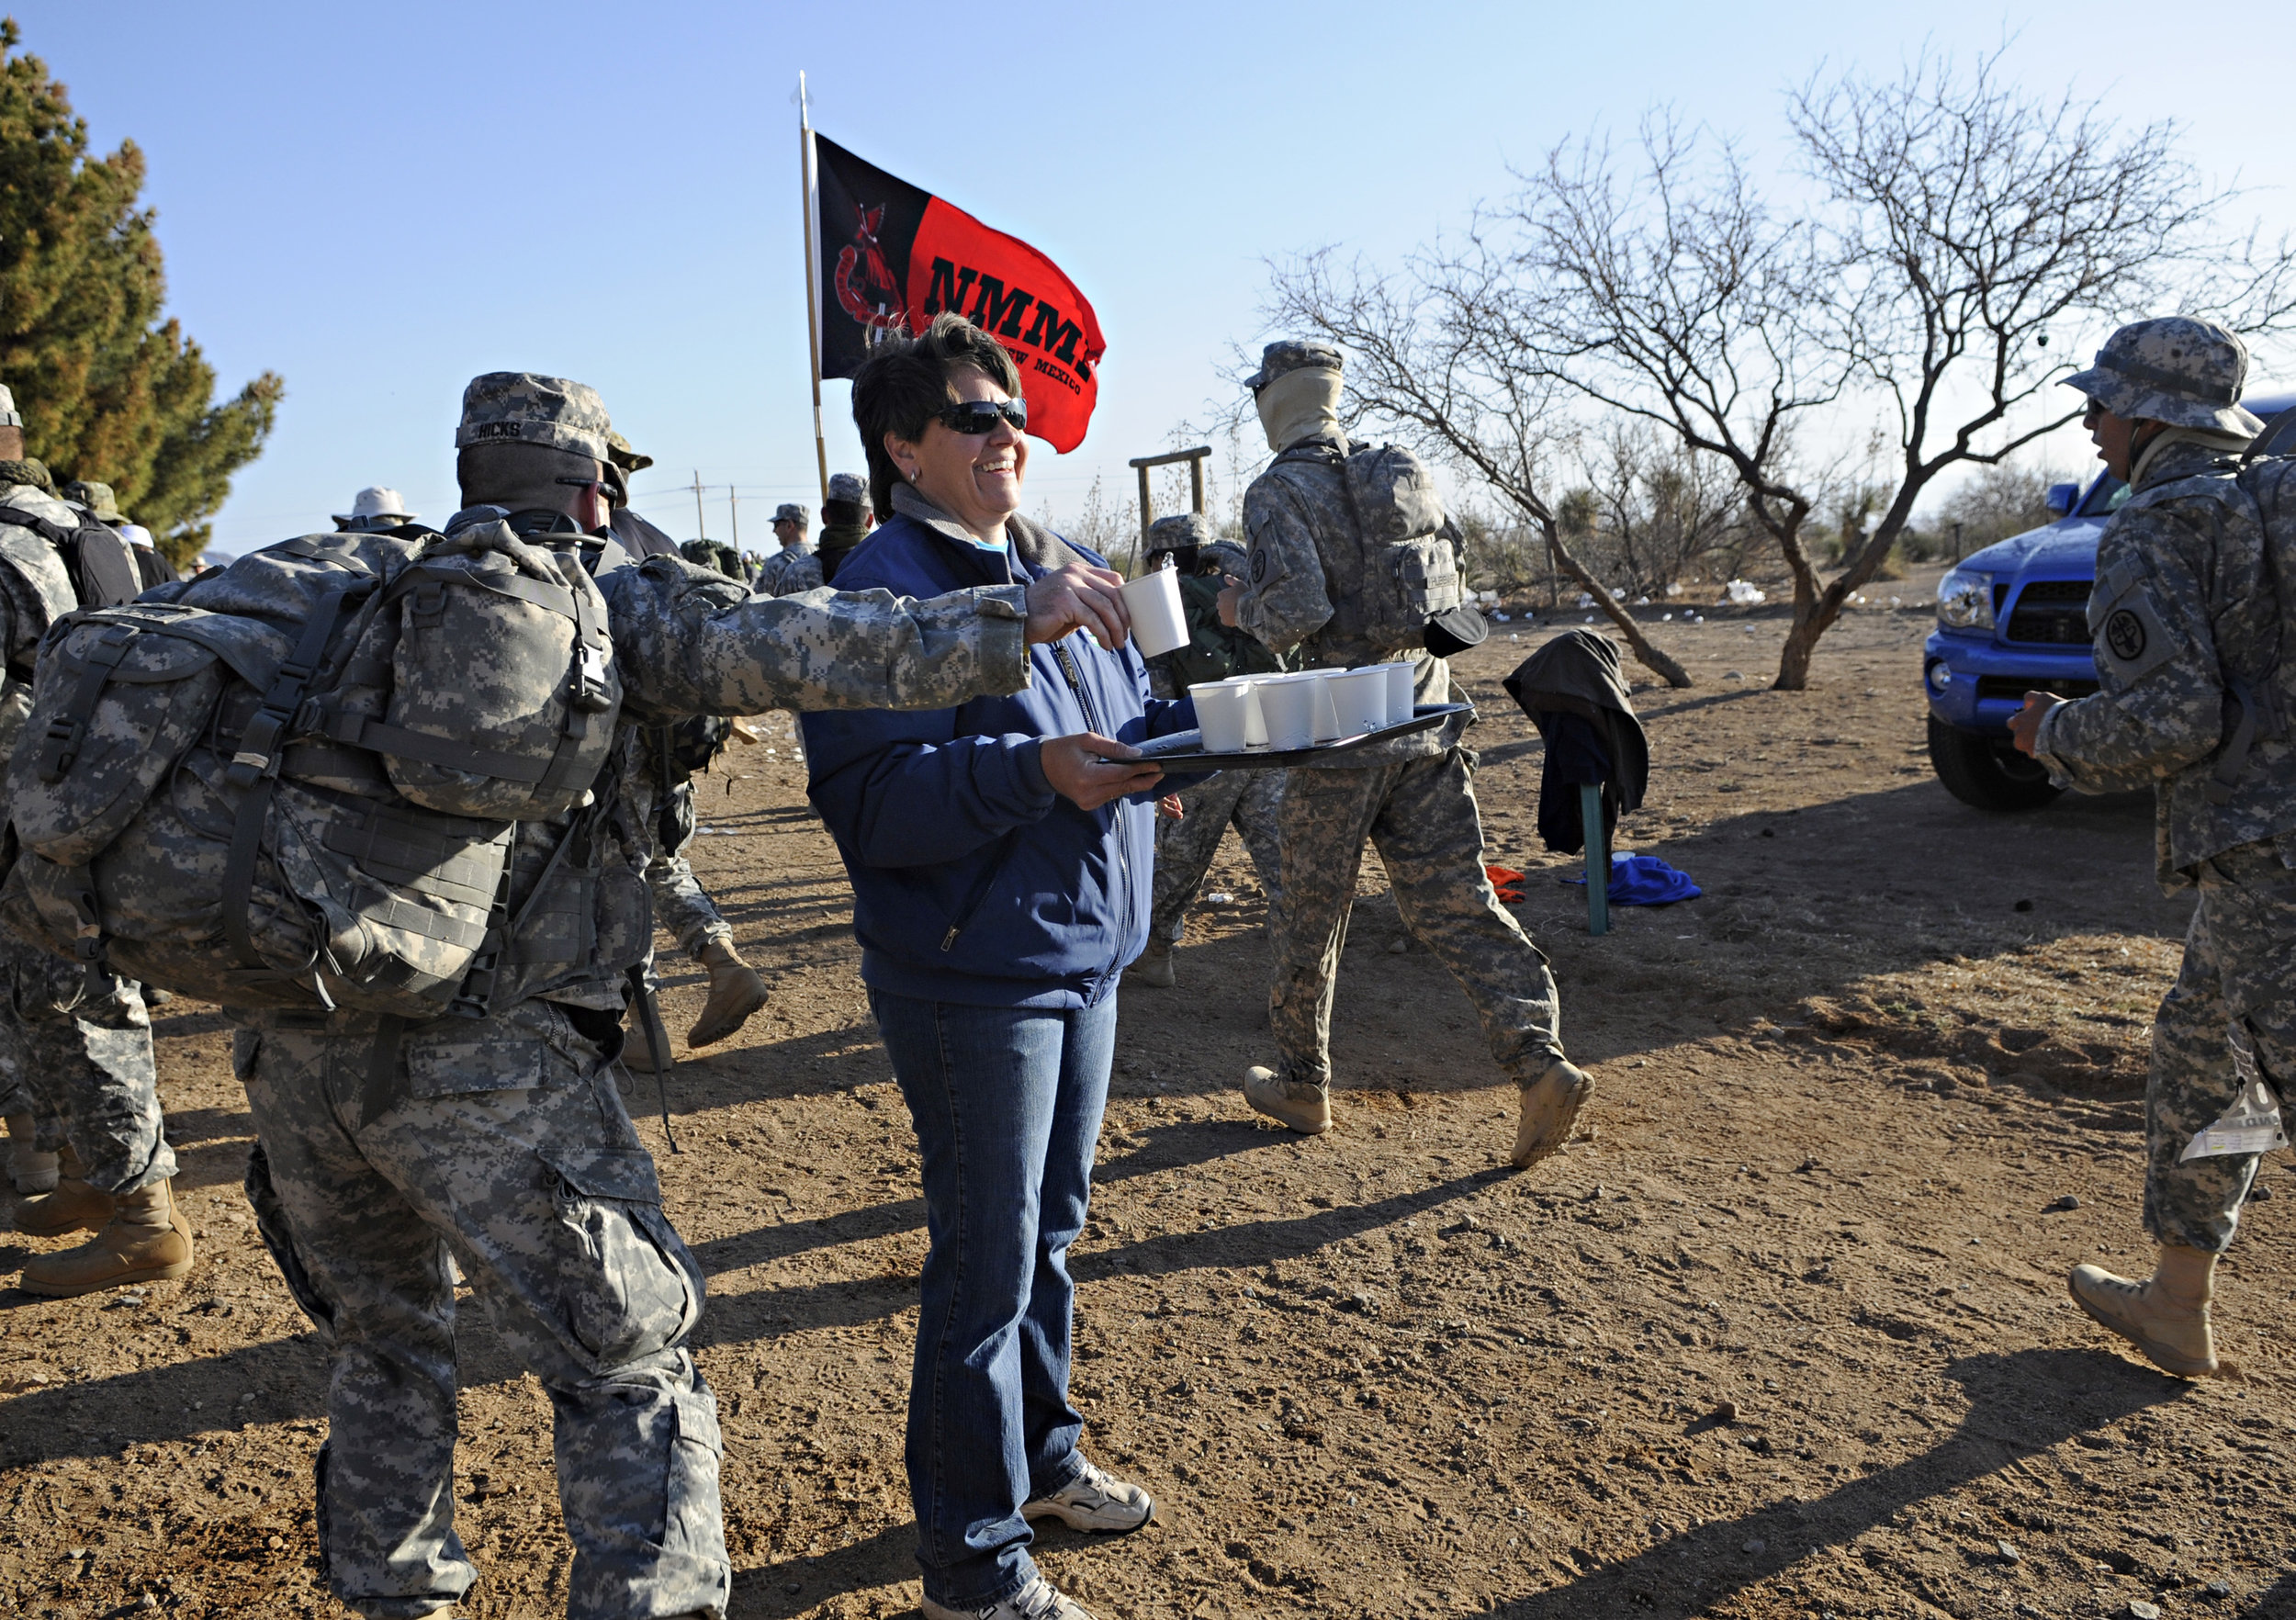  Volunteer Vicki Anderson, from Las Cruces, holds out water for the walkers and runners during the 22nd Annual Bataan Memorial Death March at White Sands Missile Range, Sunday, March 27, 2011. (Morgan Petroski/Albuquerque Journal) 